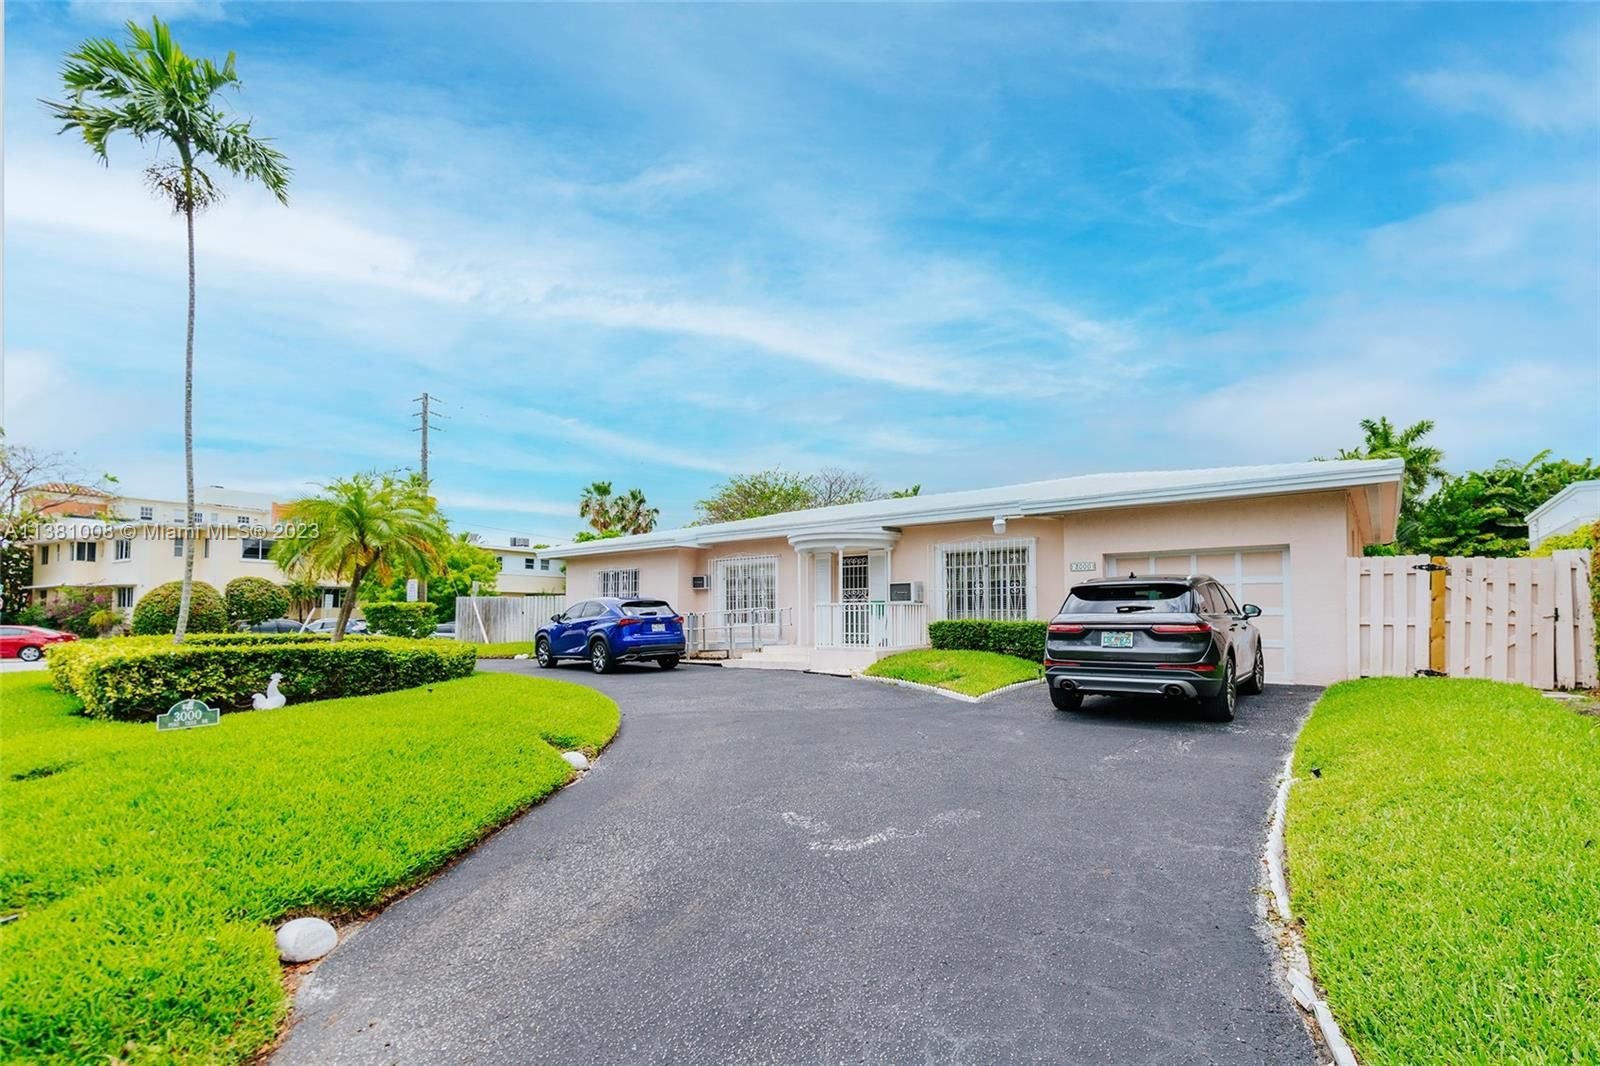 Real estate property located at 3000 Pine Tree Dr, Miami-Dade County, Miami Beach, FL